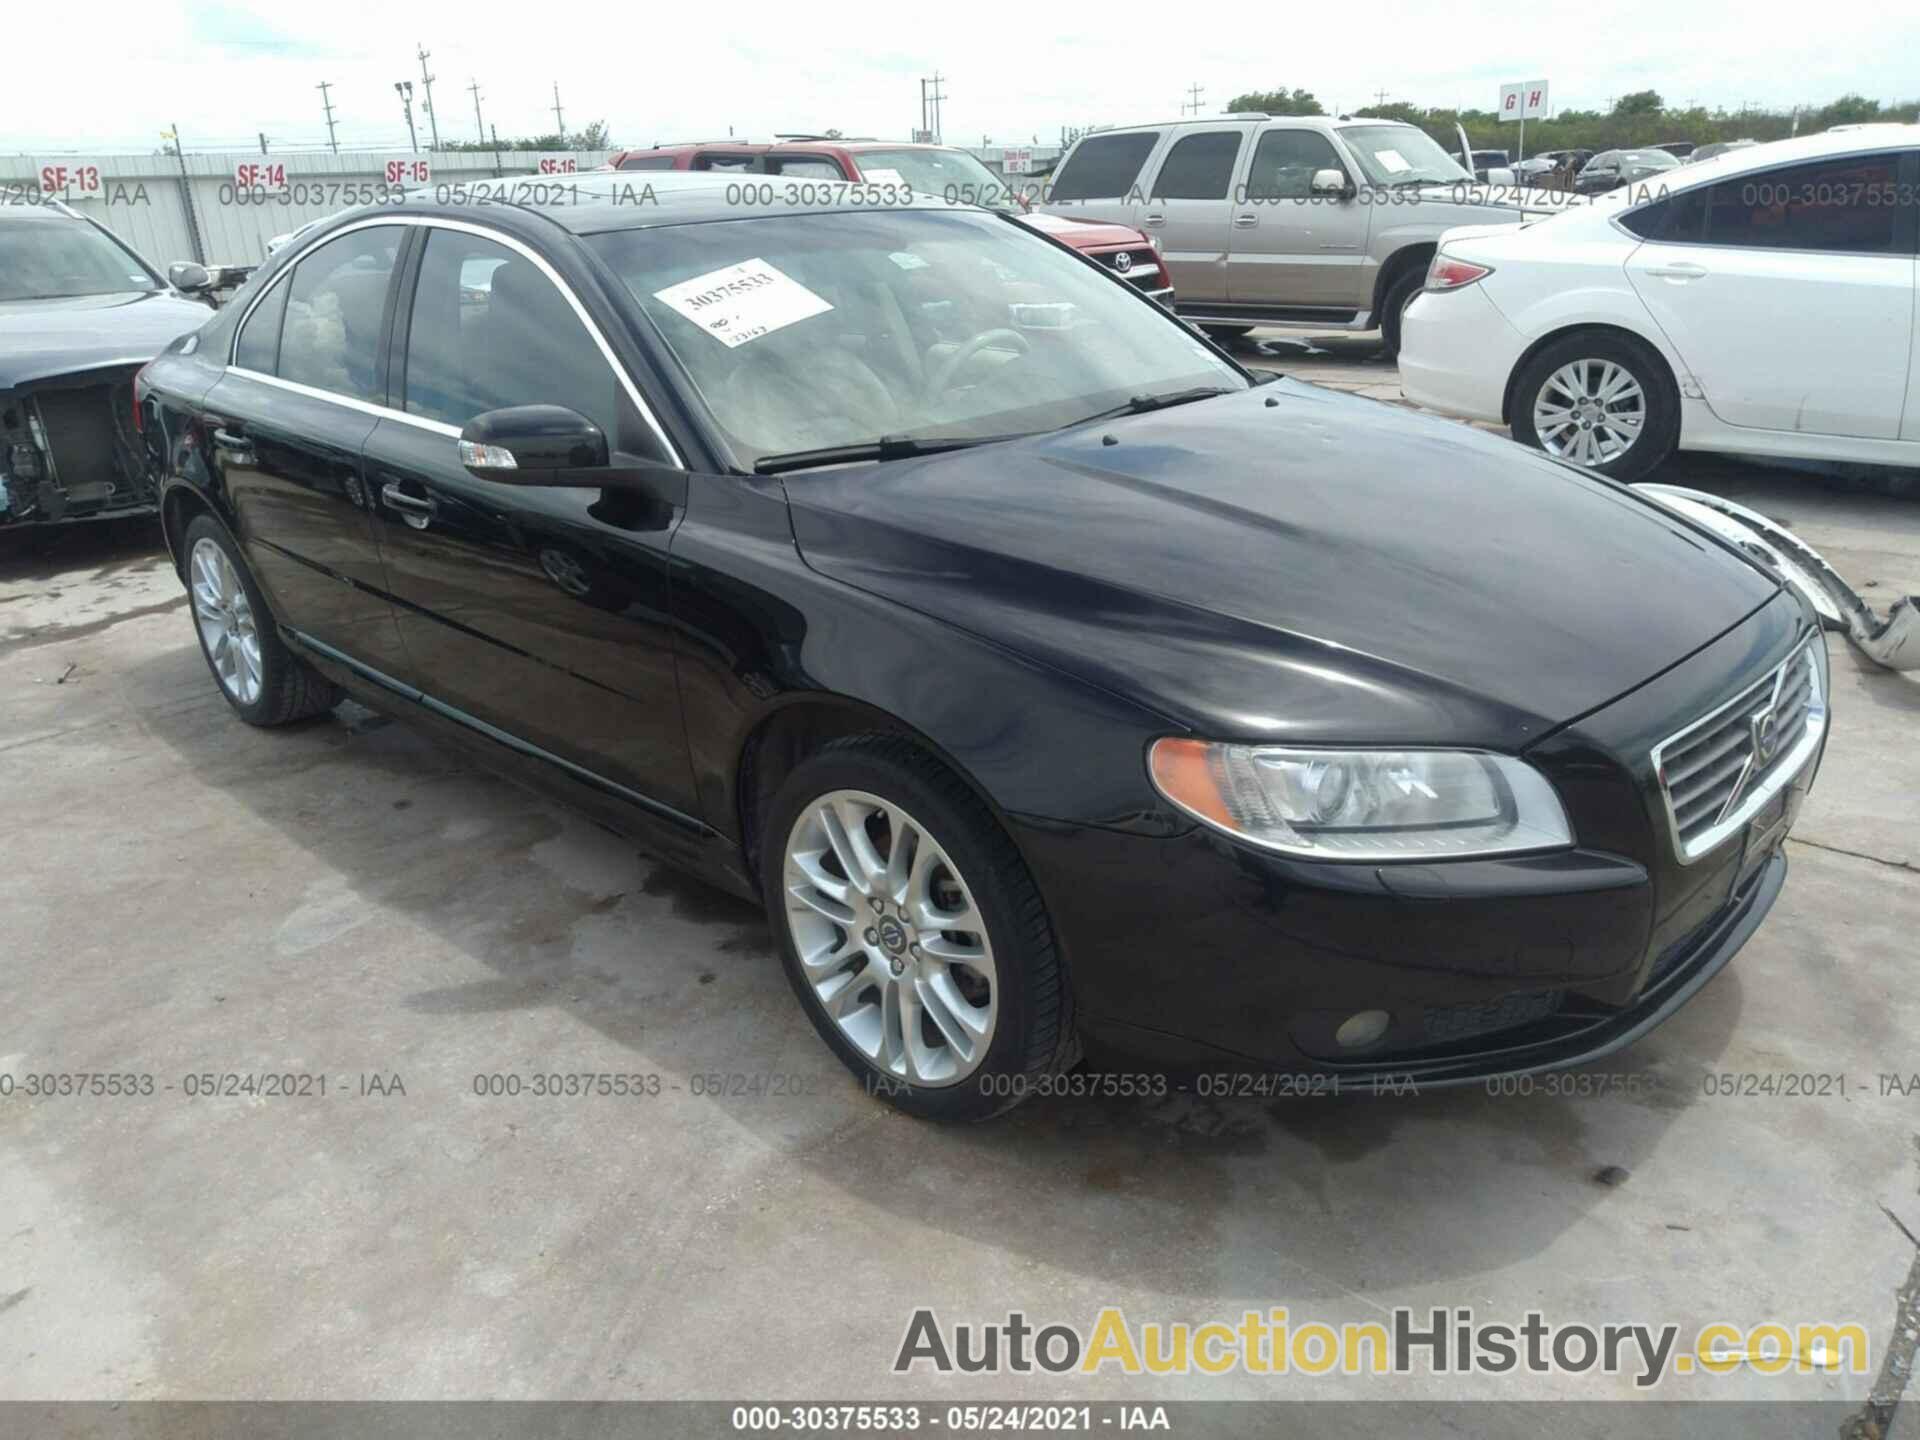 VOLVO S80 3.2L, YV1AS982081048493